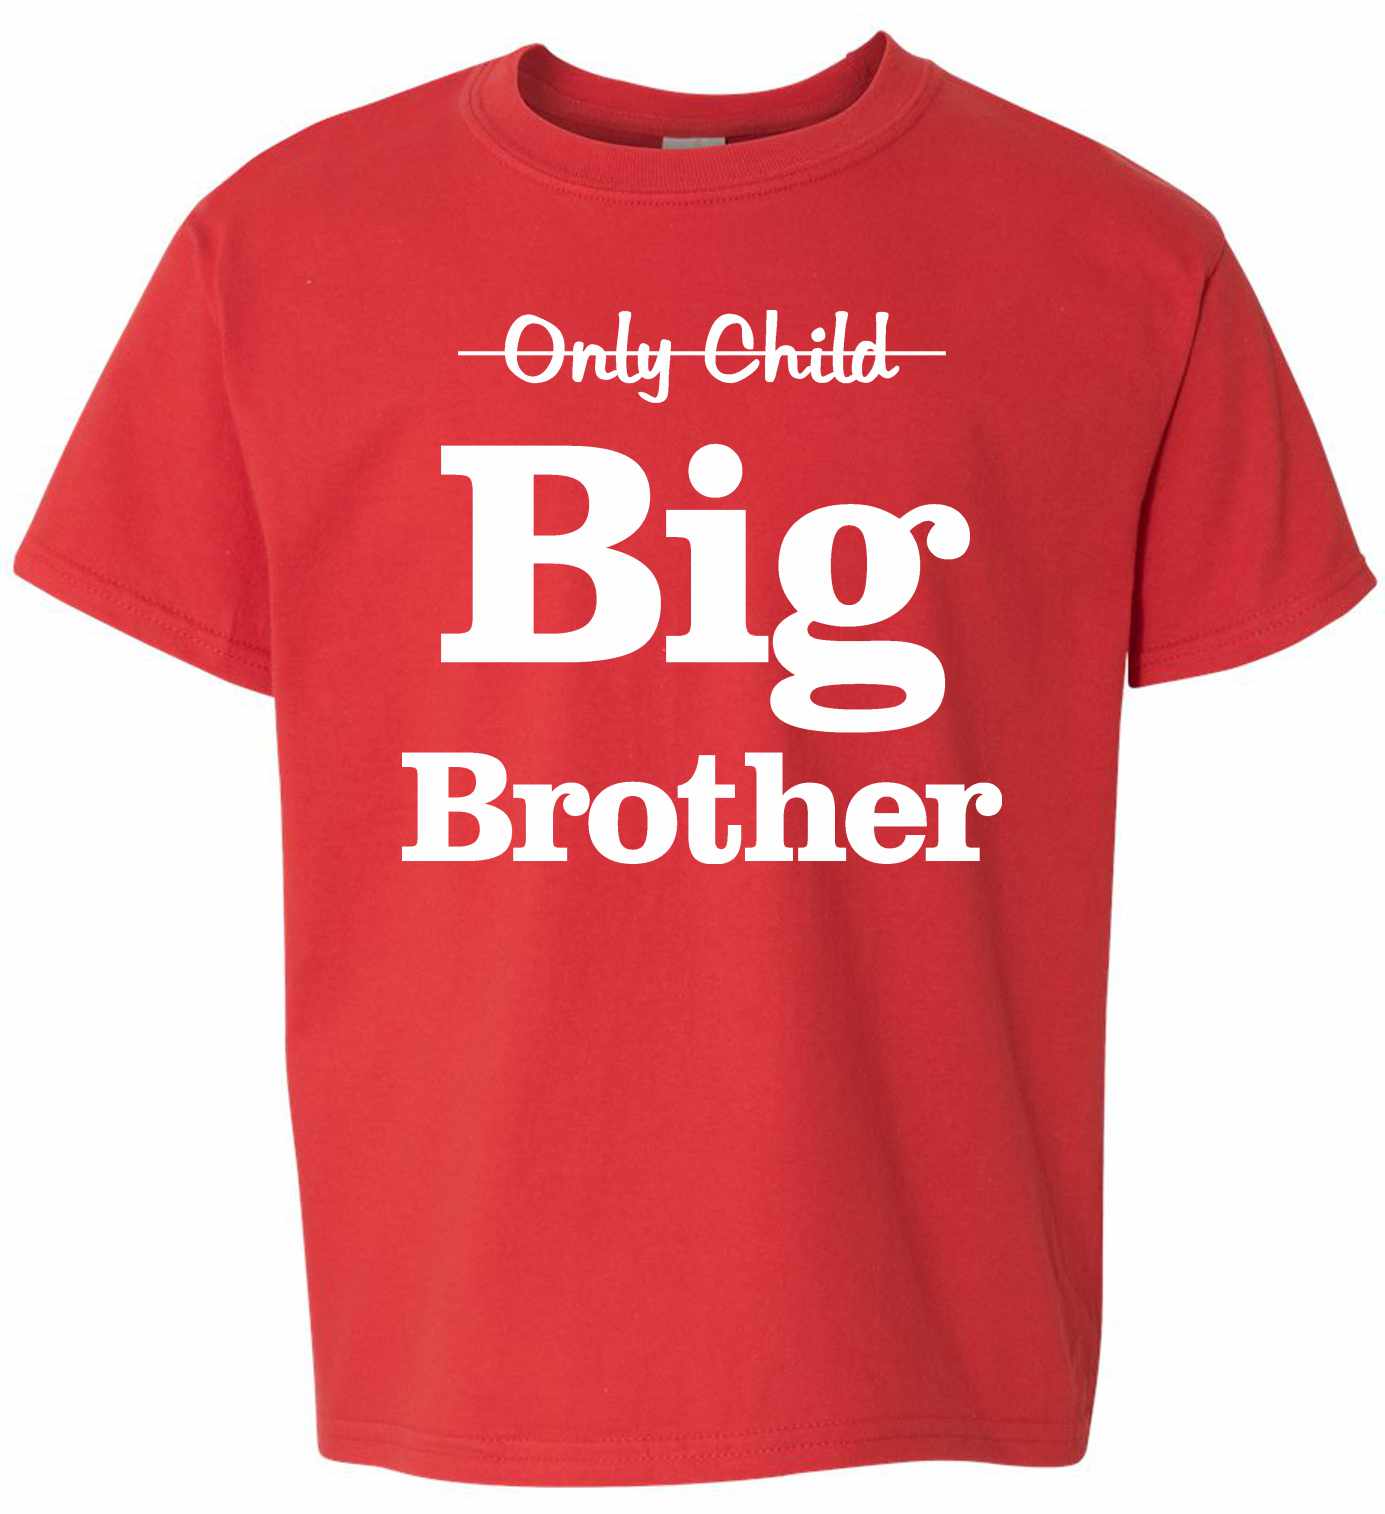 Only Child Big Brother on Kids T-Shirt (#955-201)